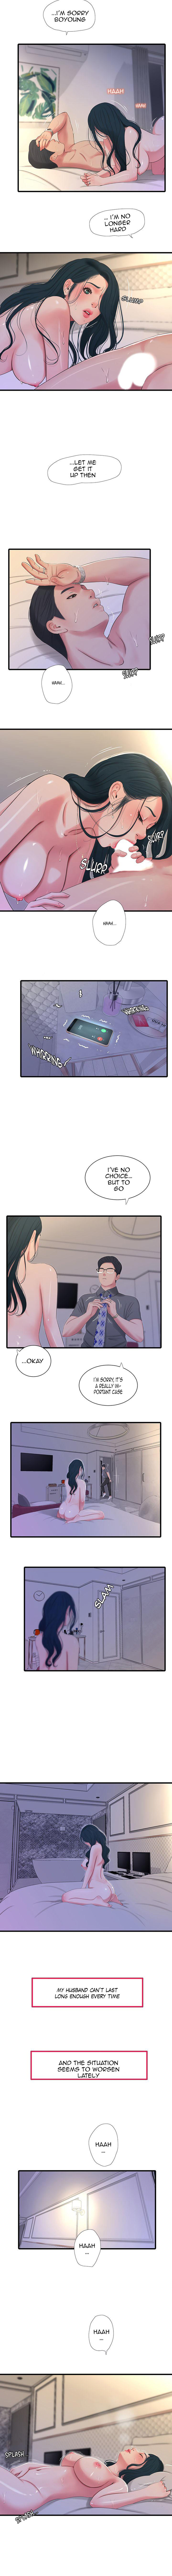 Sexcams Maidens In-Law | One's In-Laws Virgins Ch. 26-30 [English] Money - Page 9